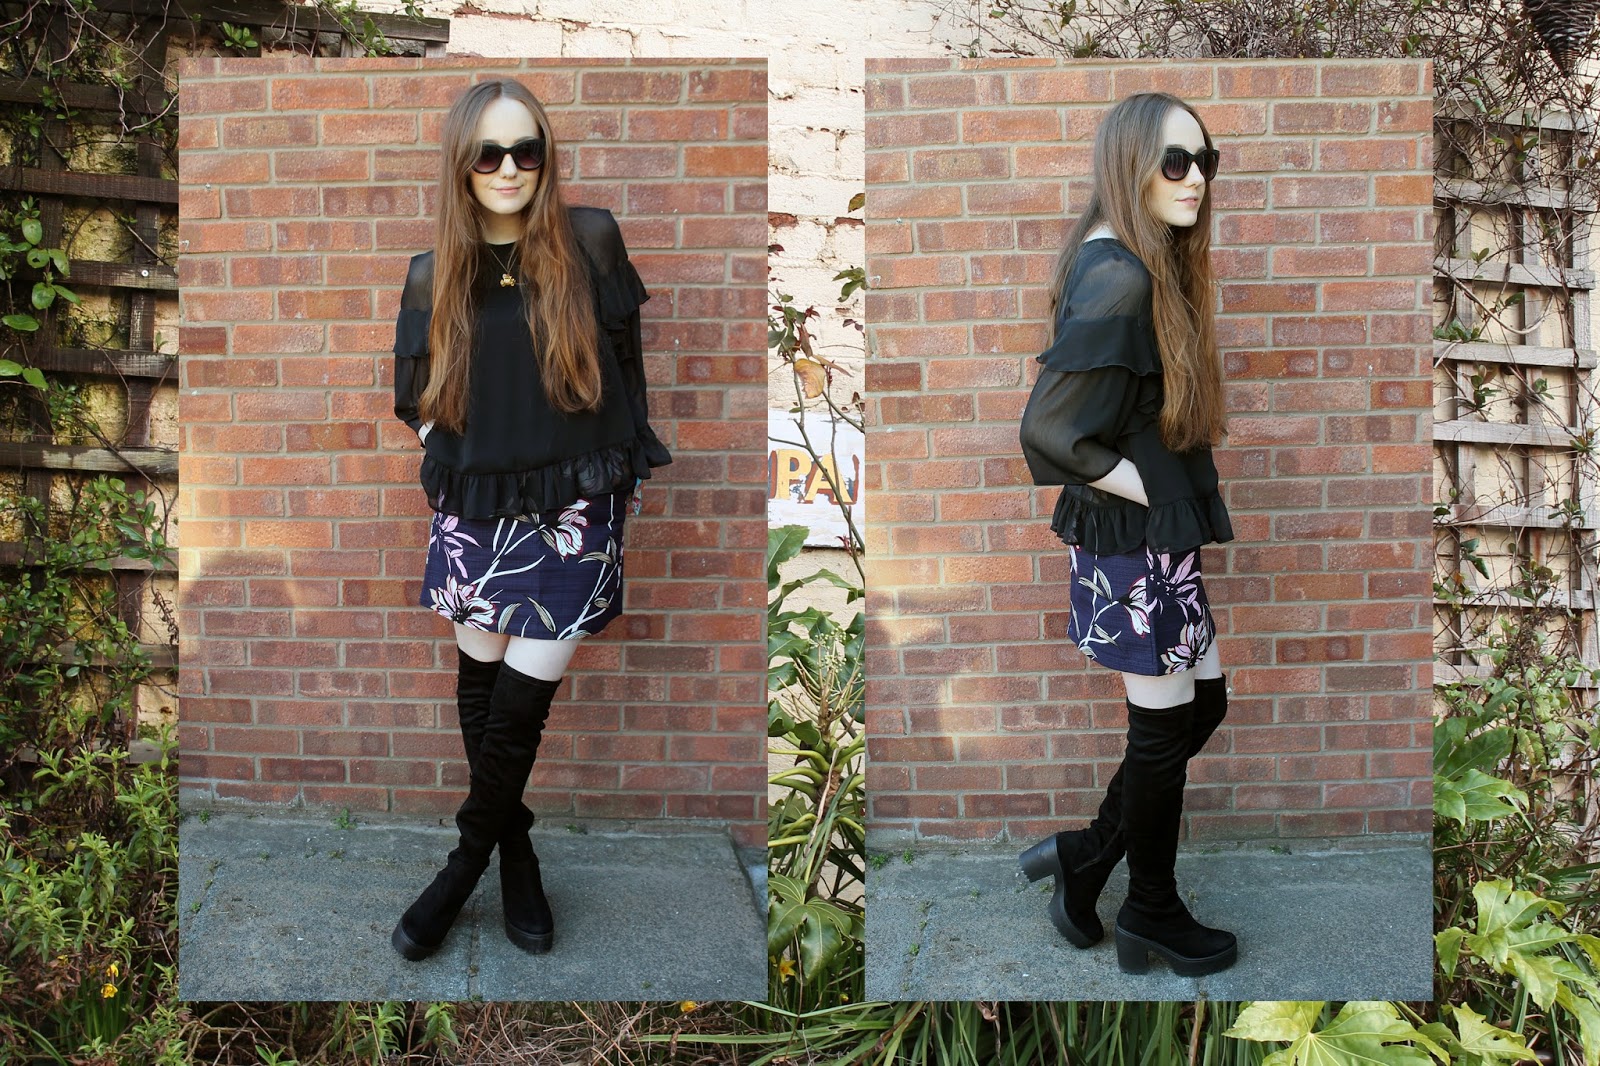 warehouse urban garden party outfit ootd featuring black sheer ruffle blouse, floral a line skirt and suede over the knee boots